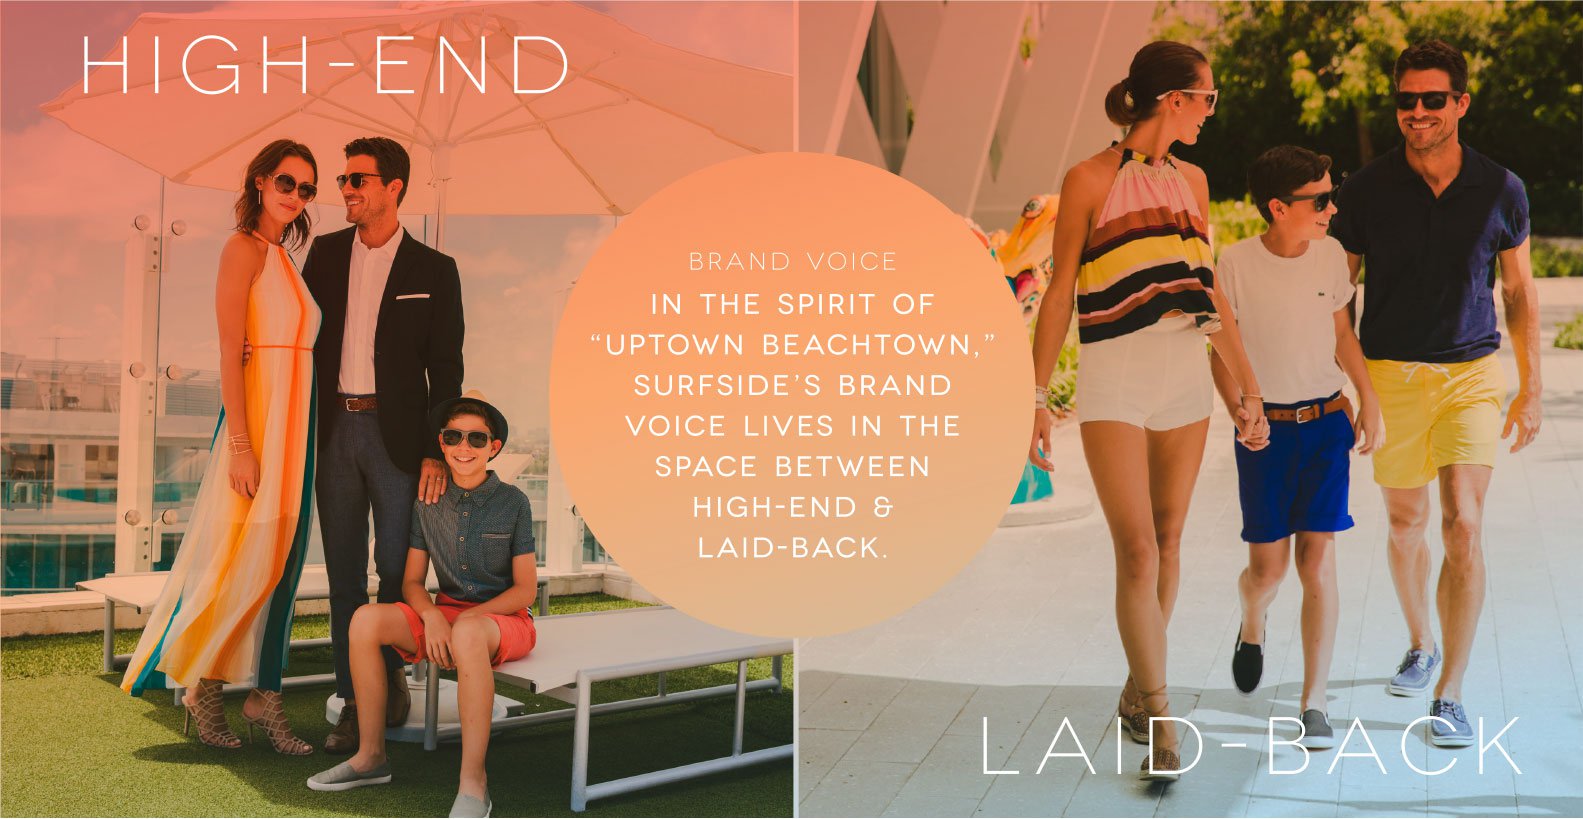 Jacober Creative Identity and Campaign for the Town of Surfside Florida - Photo of family dressed up and dressed down to communicate the high-end and laid-back vibe Surfside offers